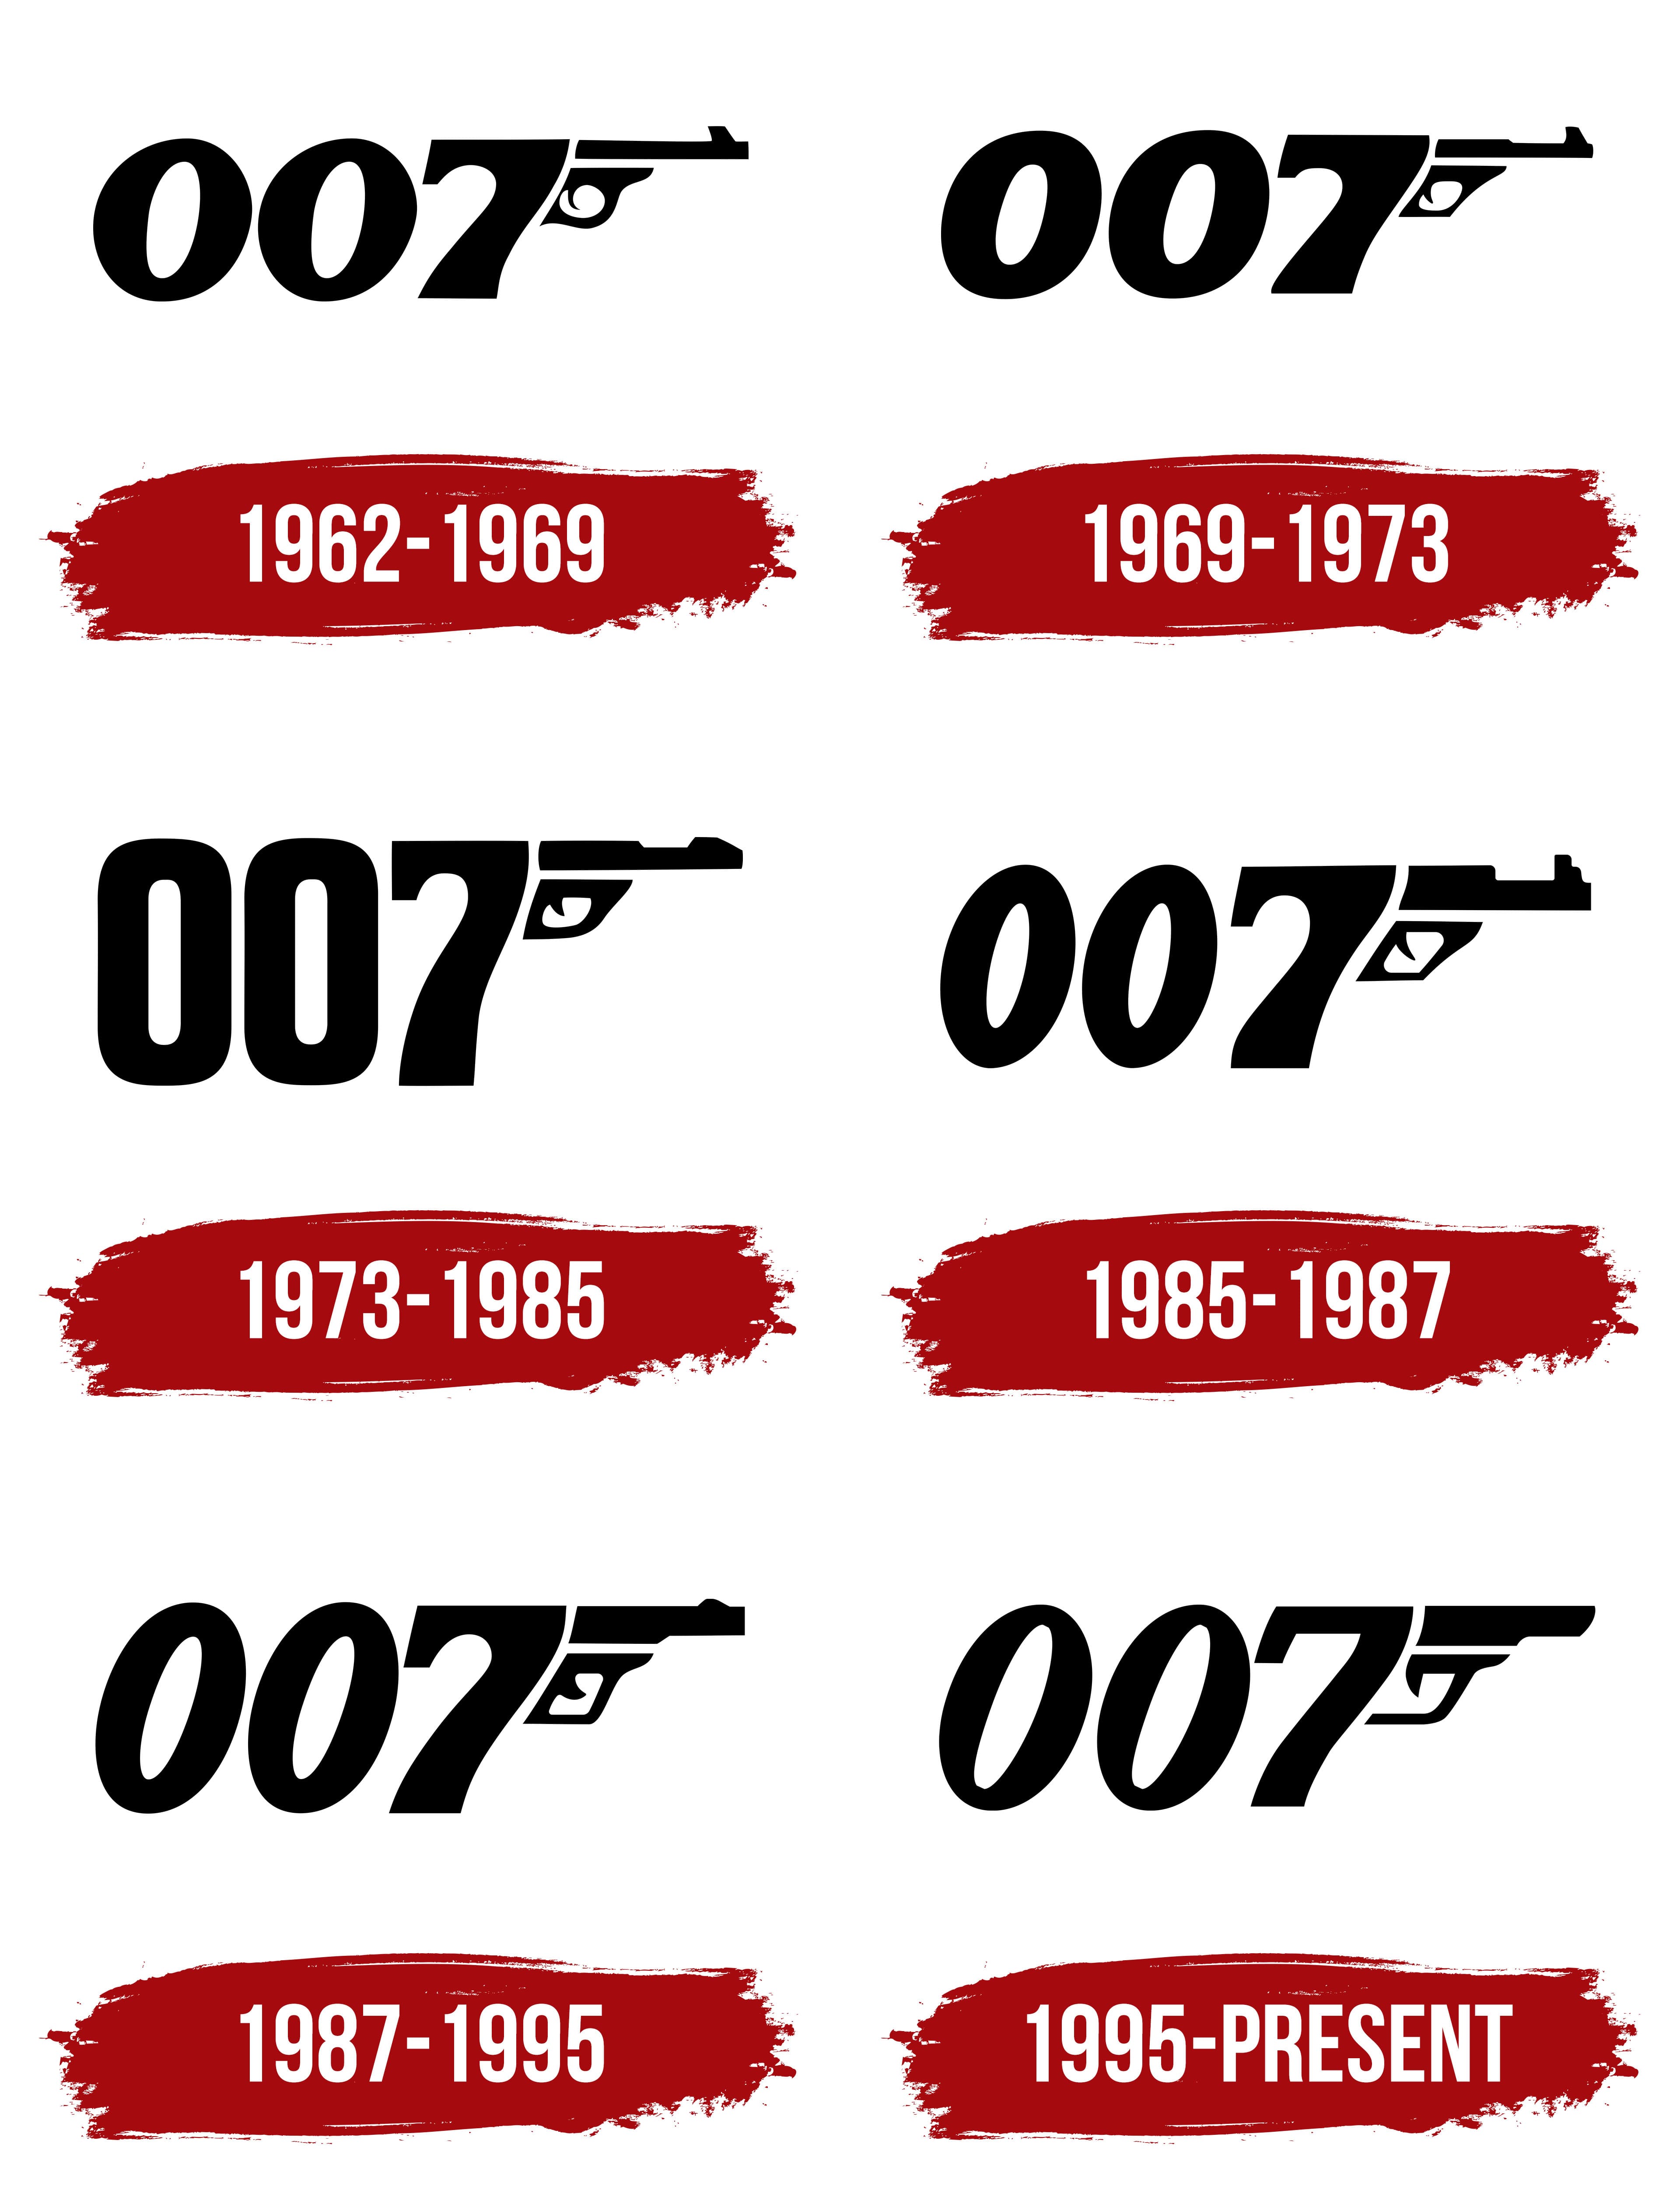 007 Logo, symbol, meaning, history, PNG, brand